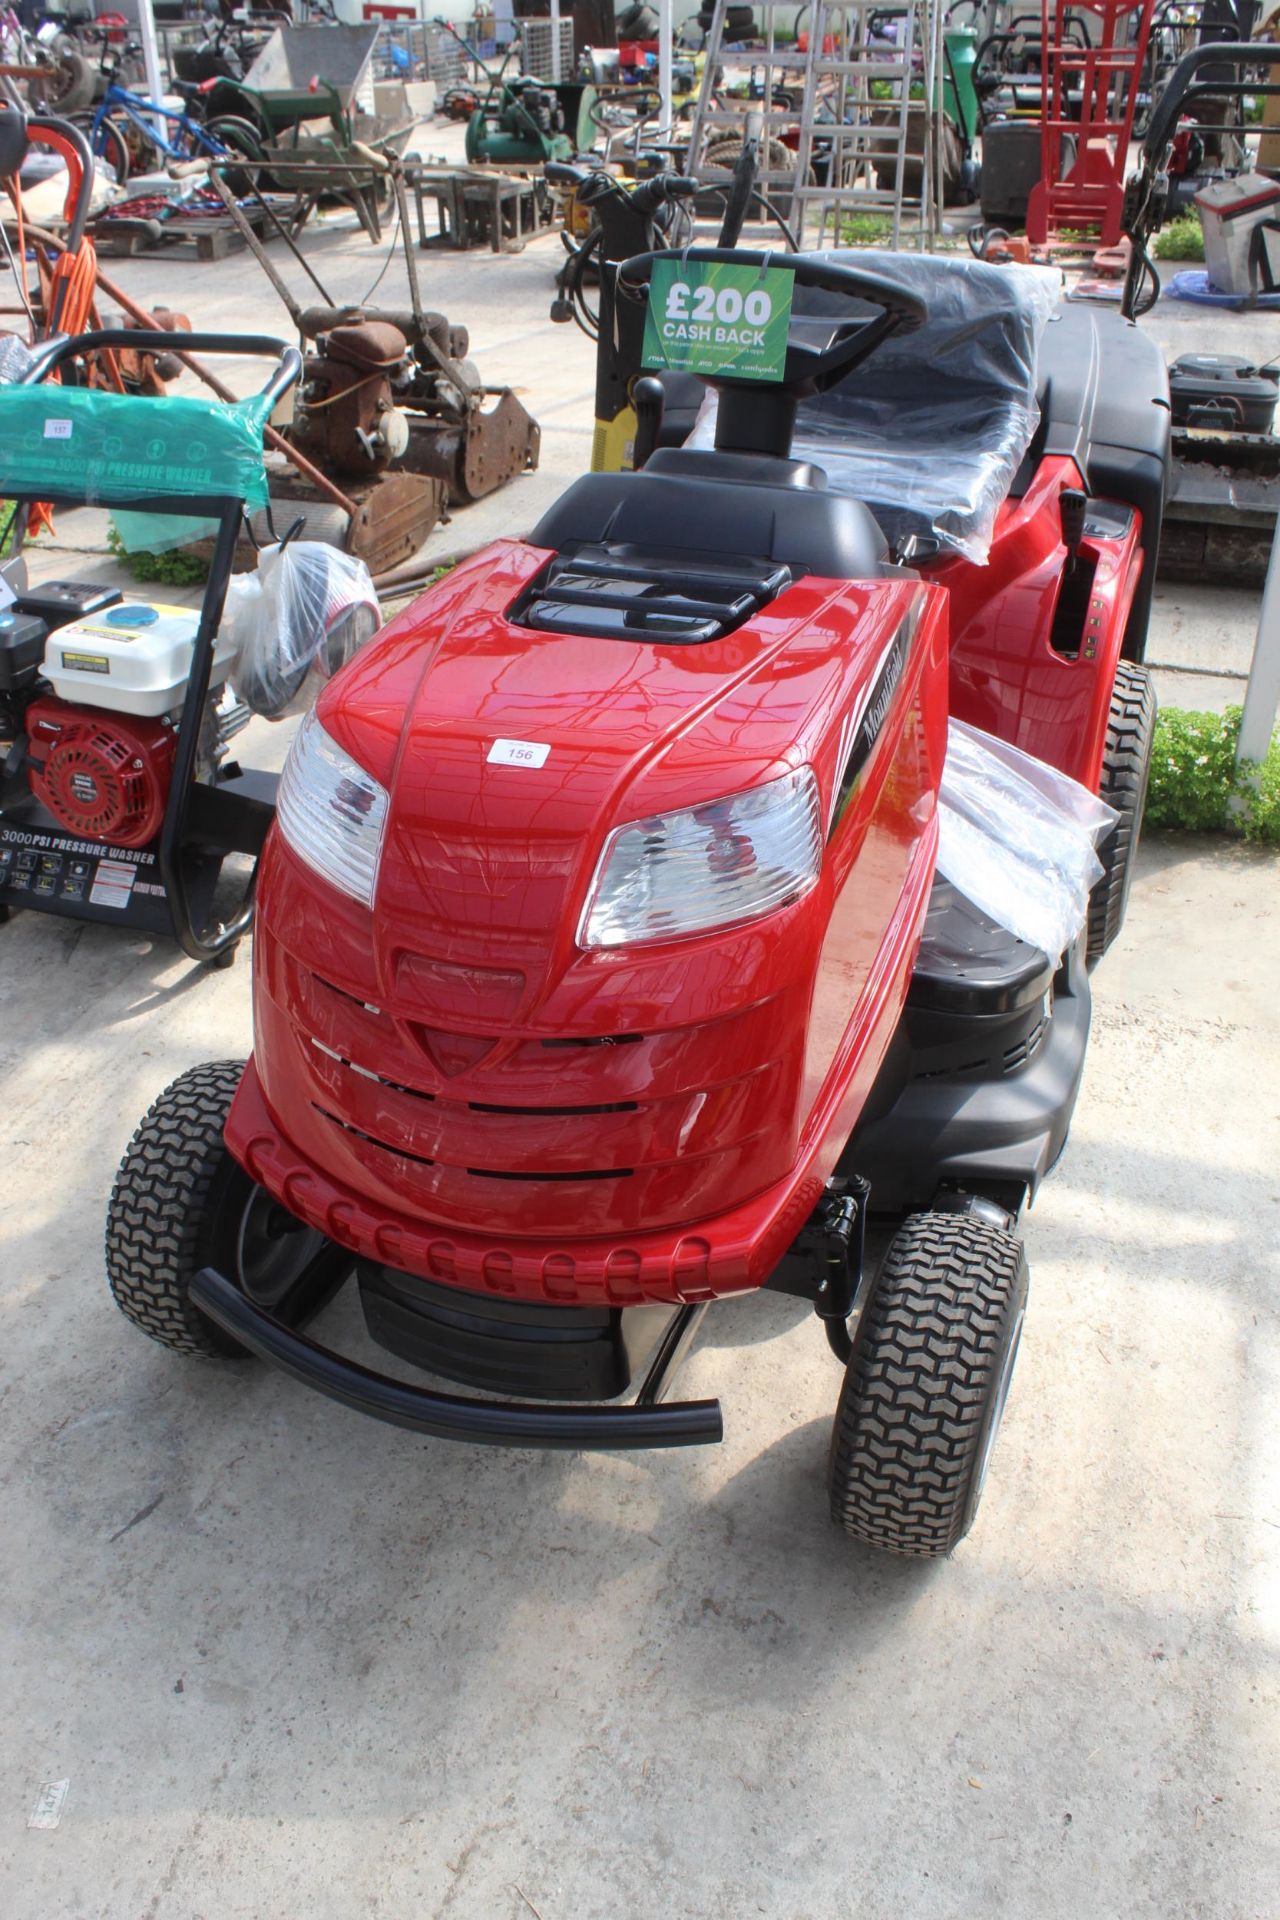 A NEW MOUNTFIELD T30M RIDE ON LAWN MOWER COMPLETE WITH A 200L REAR GRASS BOX POWERED BY A STIGG - Image 3 of 4